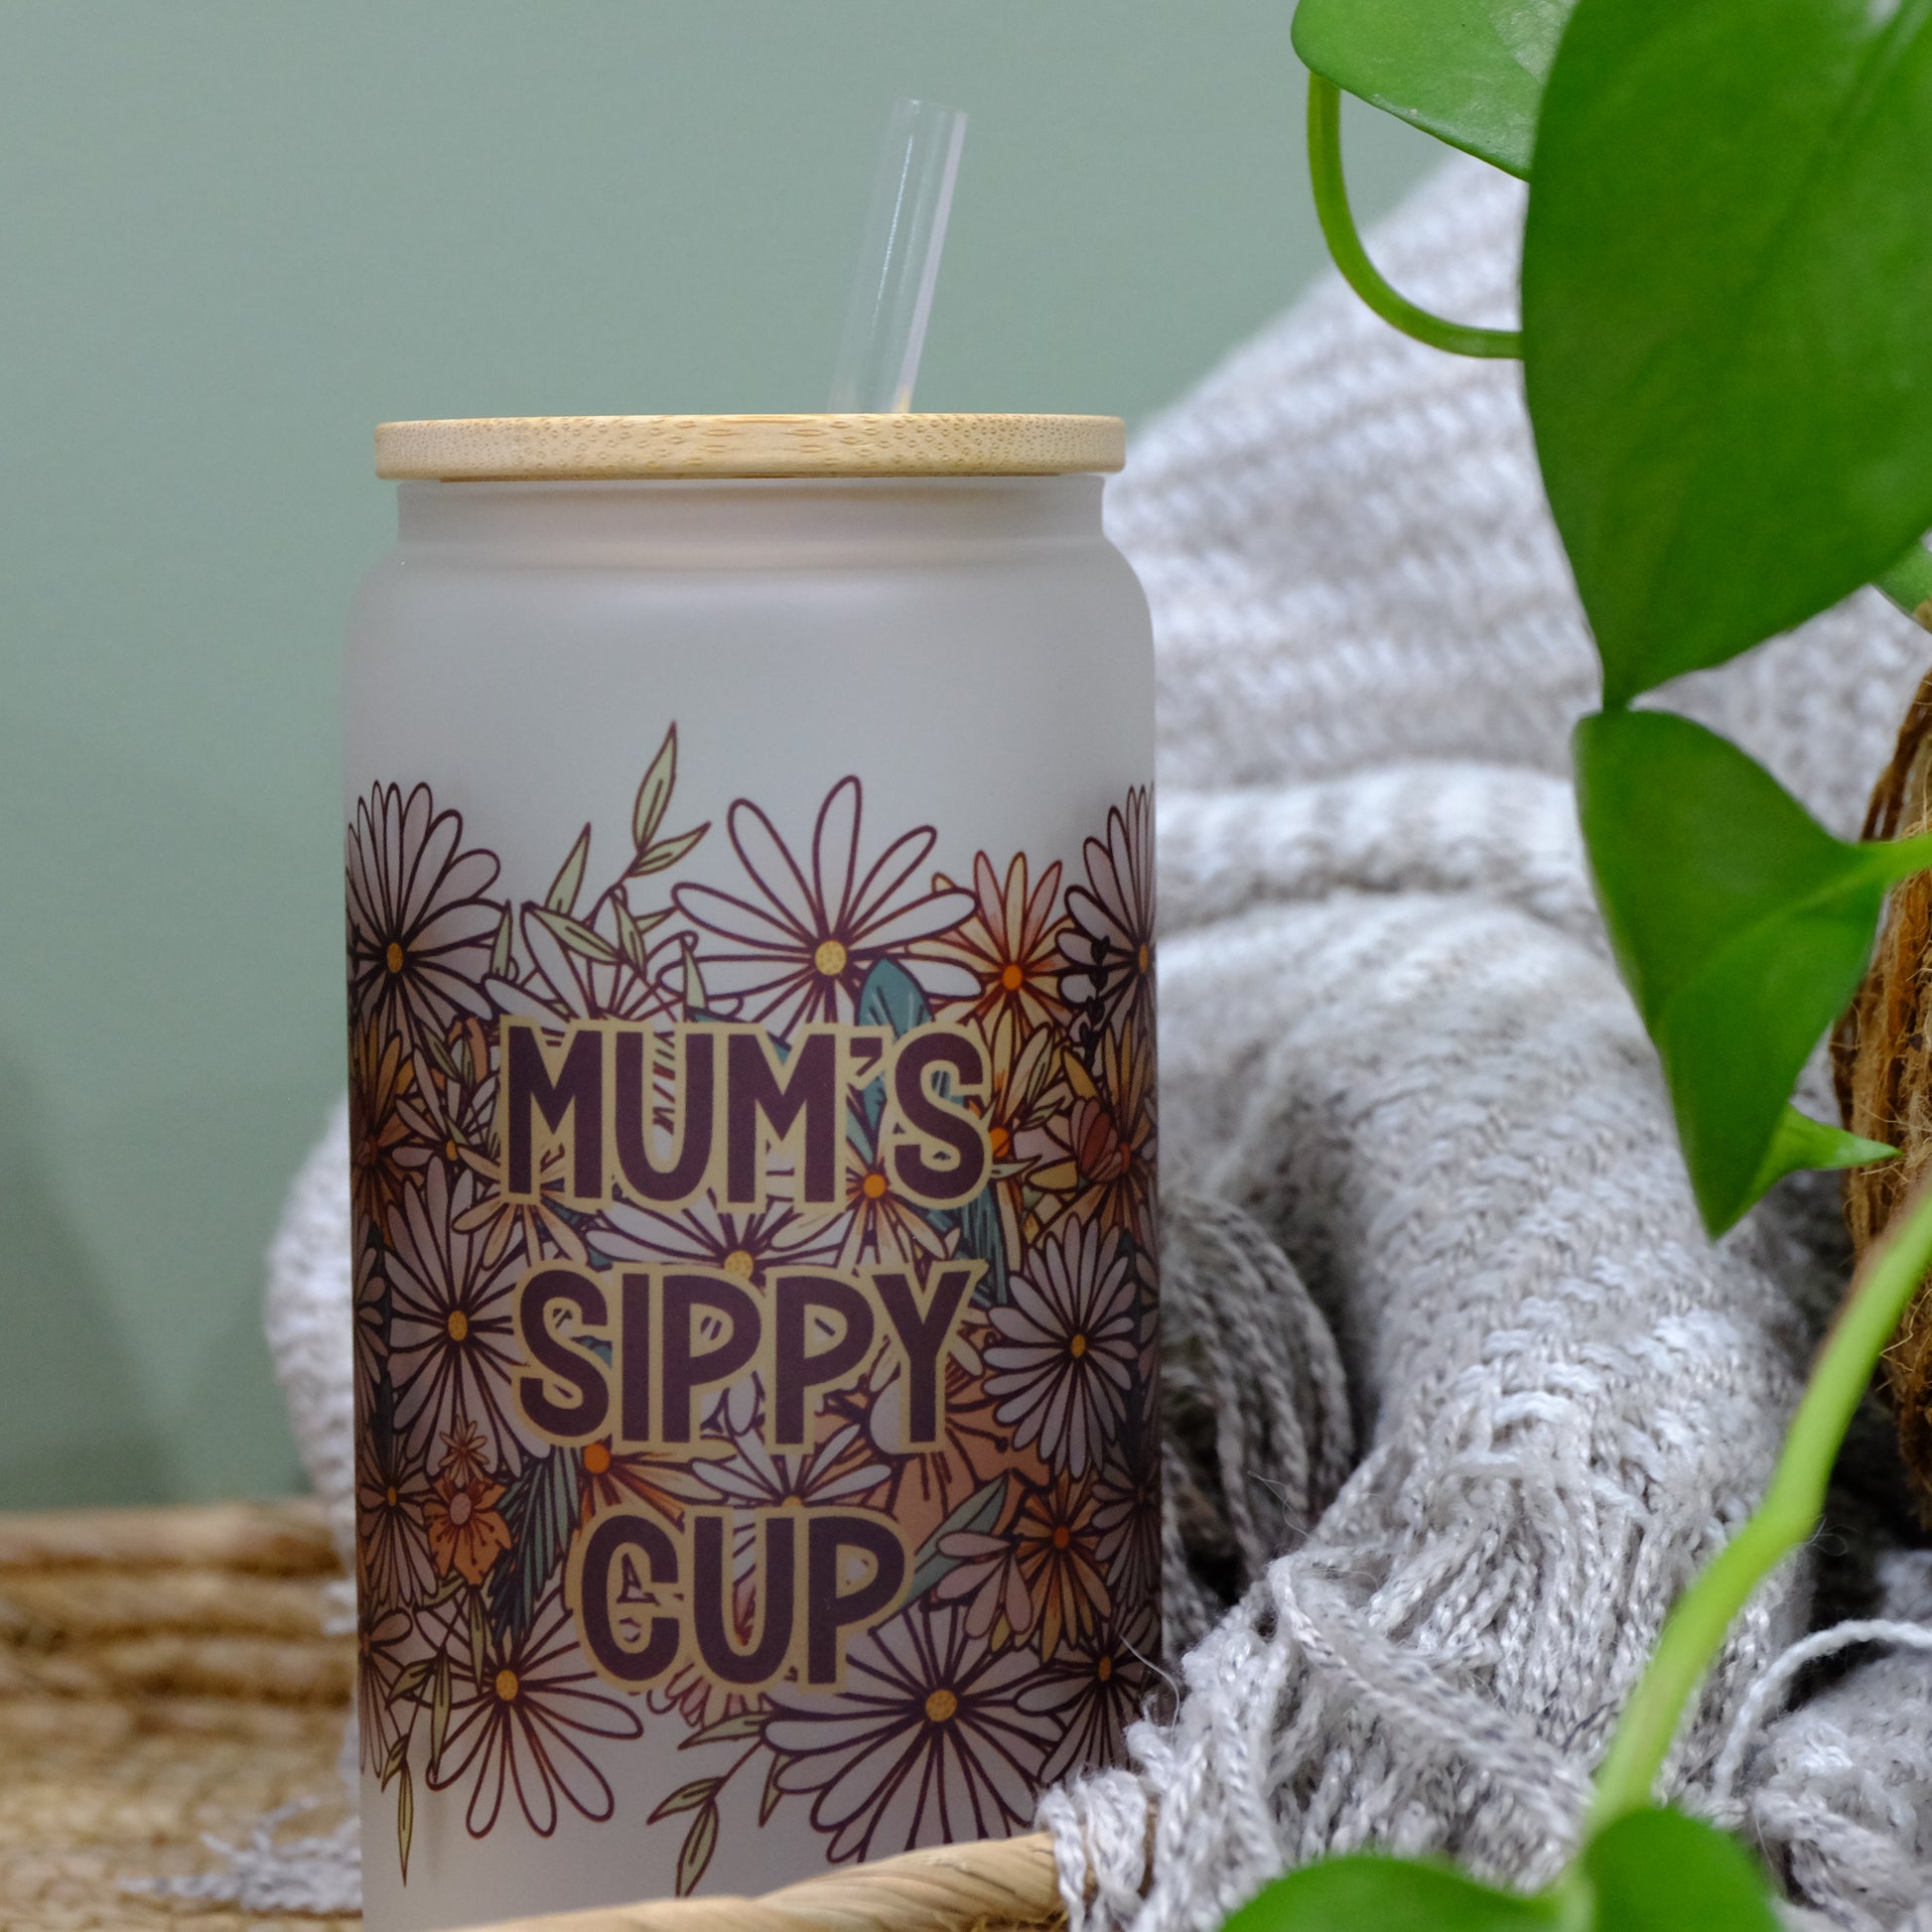 Mum's sippy cup - frosted glass with wooden lid, wildflower hand drawn design